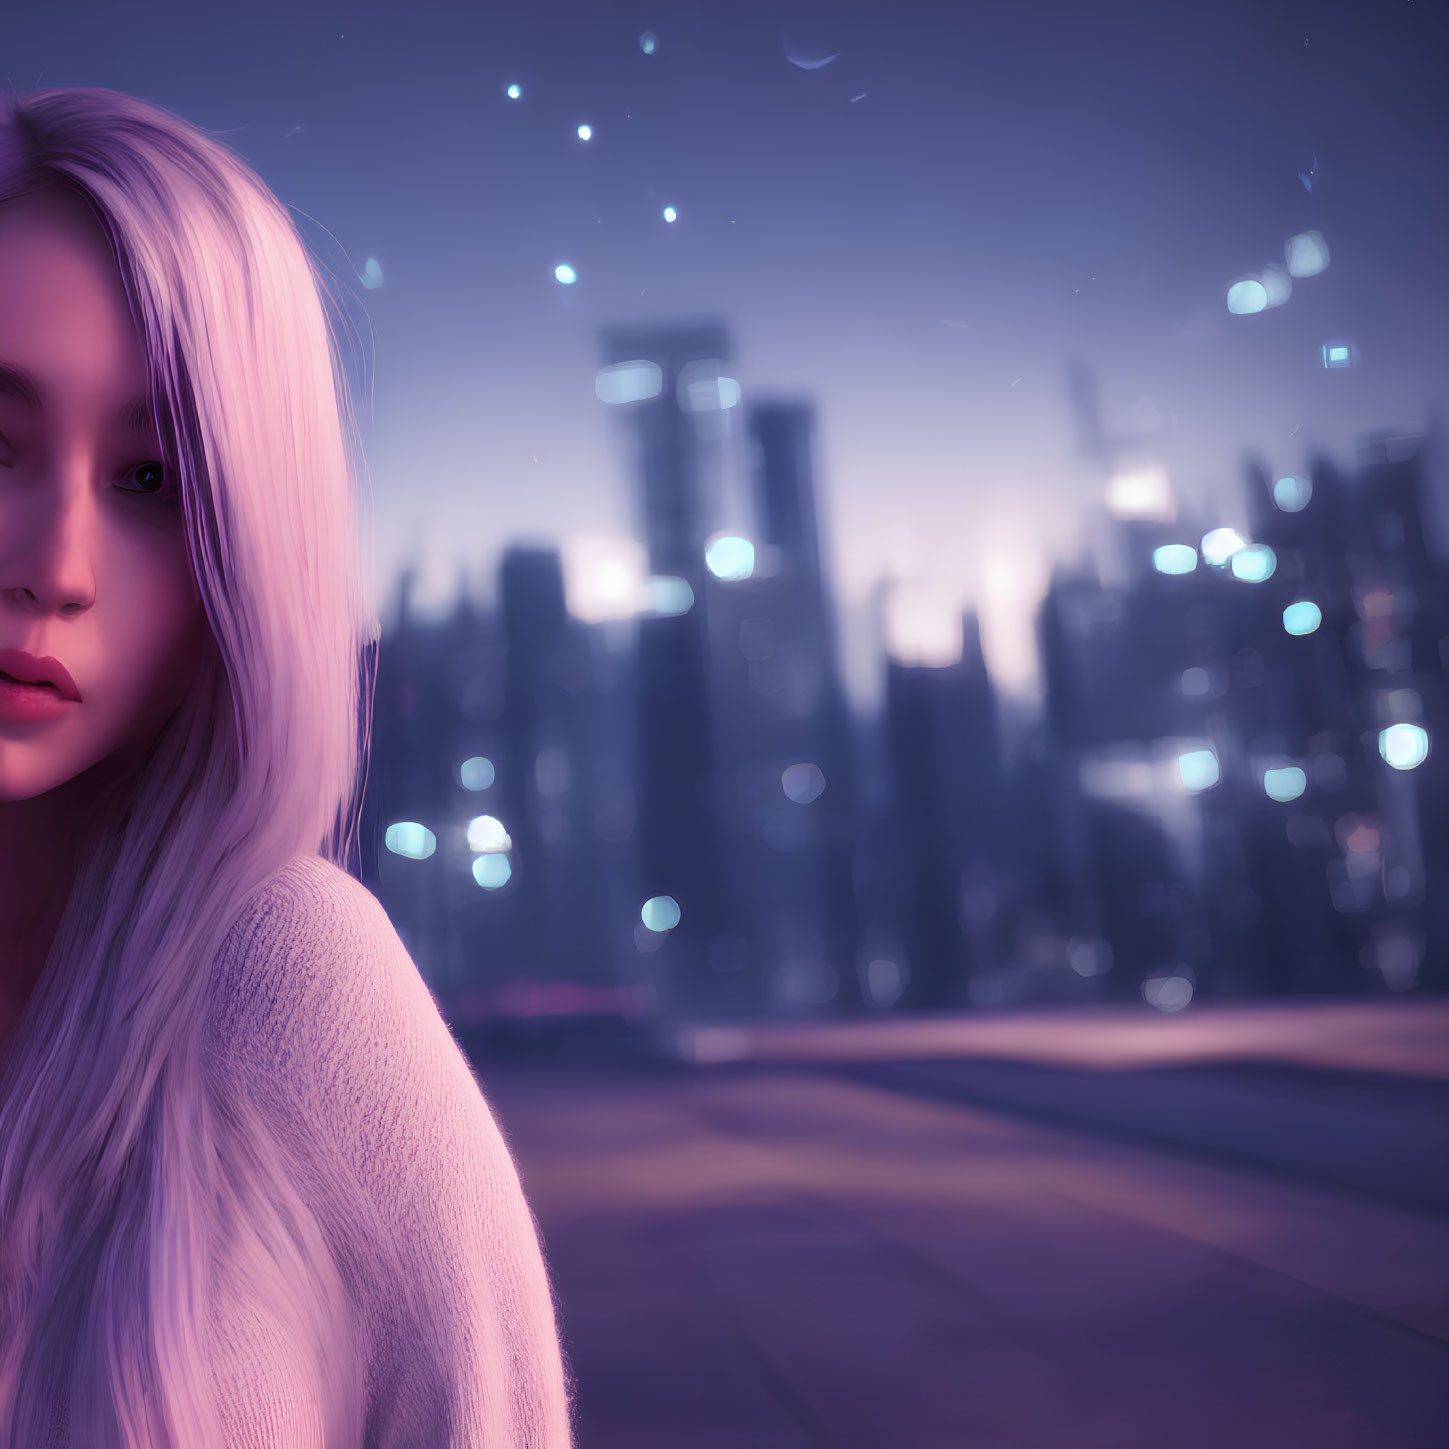 Blonde woman in focus against urban nightscape with blue lights